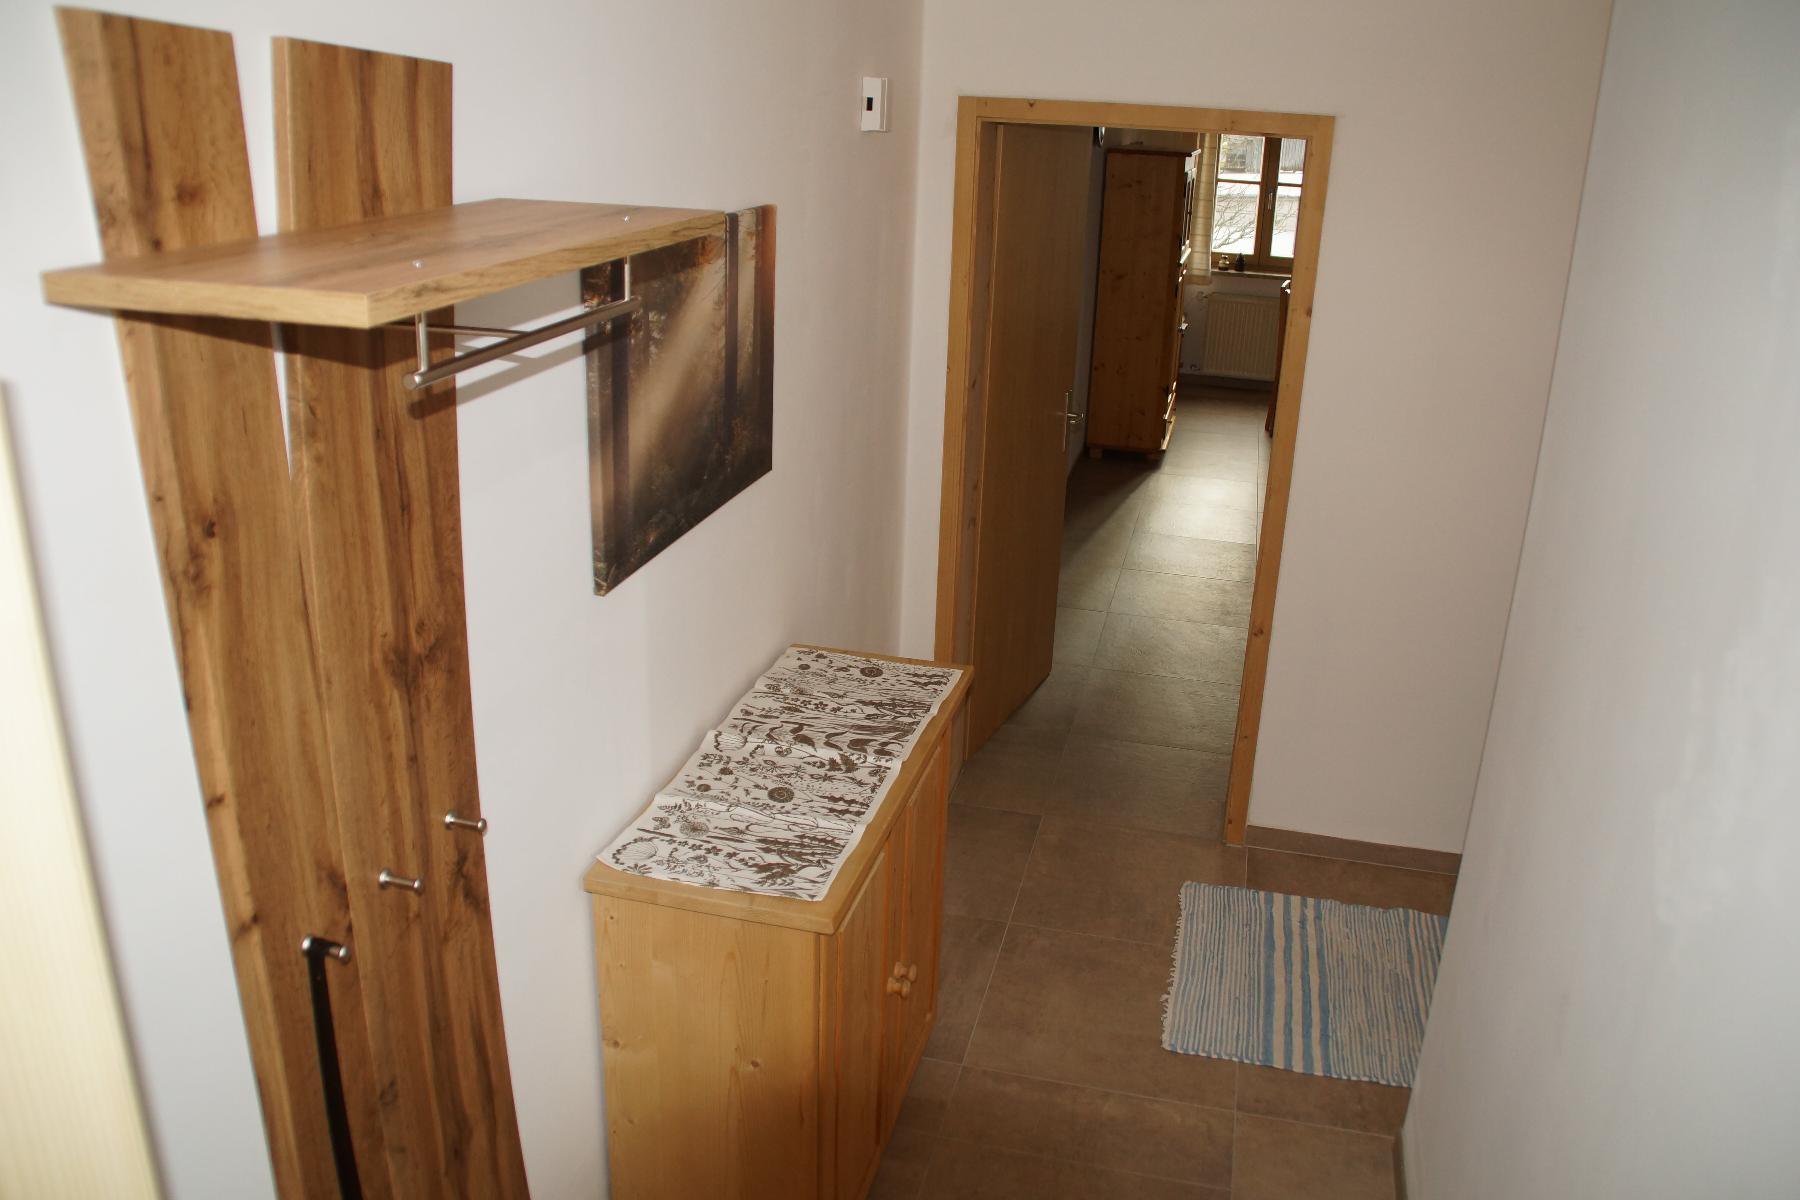 Ferienappartements Fam. Haselberger in Mauth